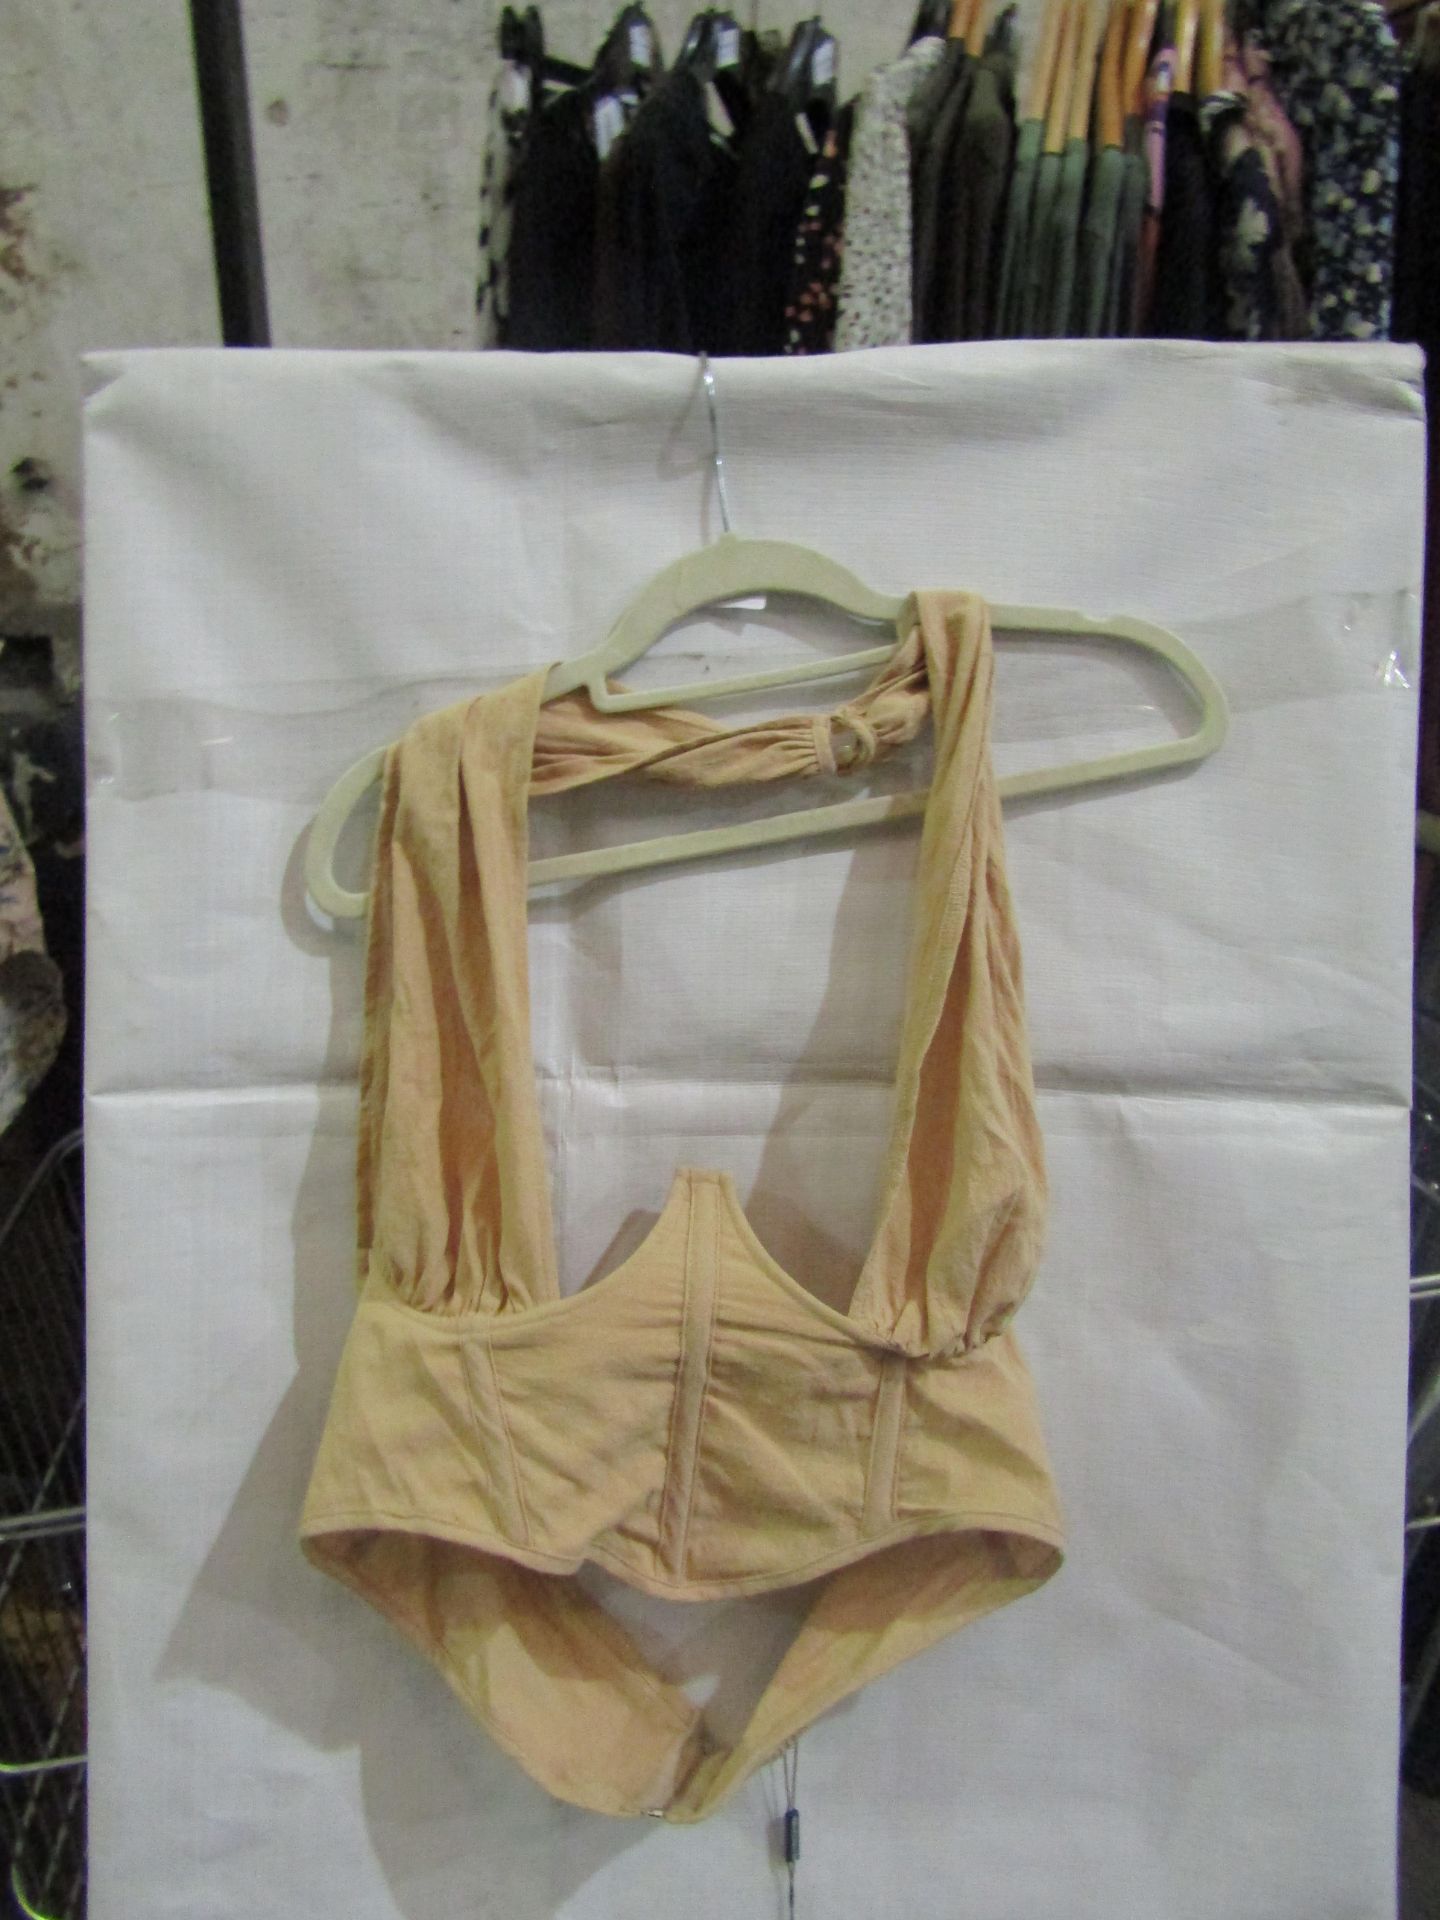 4x Pretty Little Thing Oatmeal Linen Look Cross Front Corset- Size 10, New & Packaged.